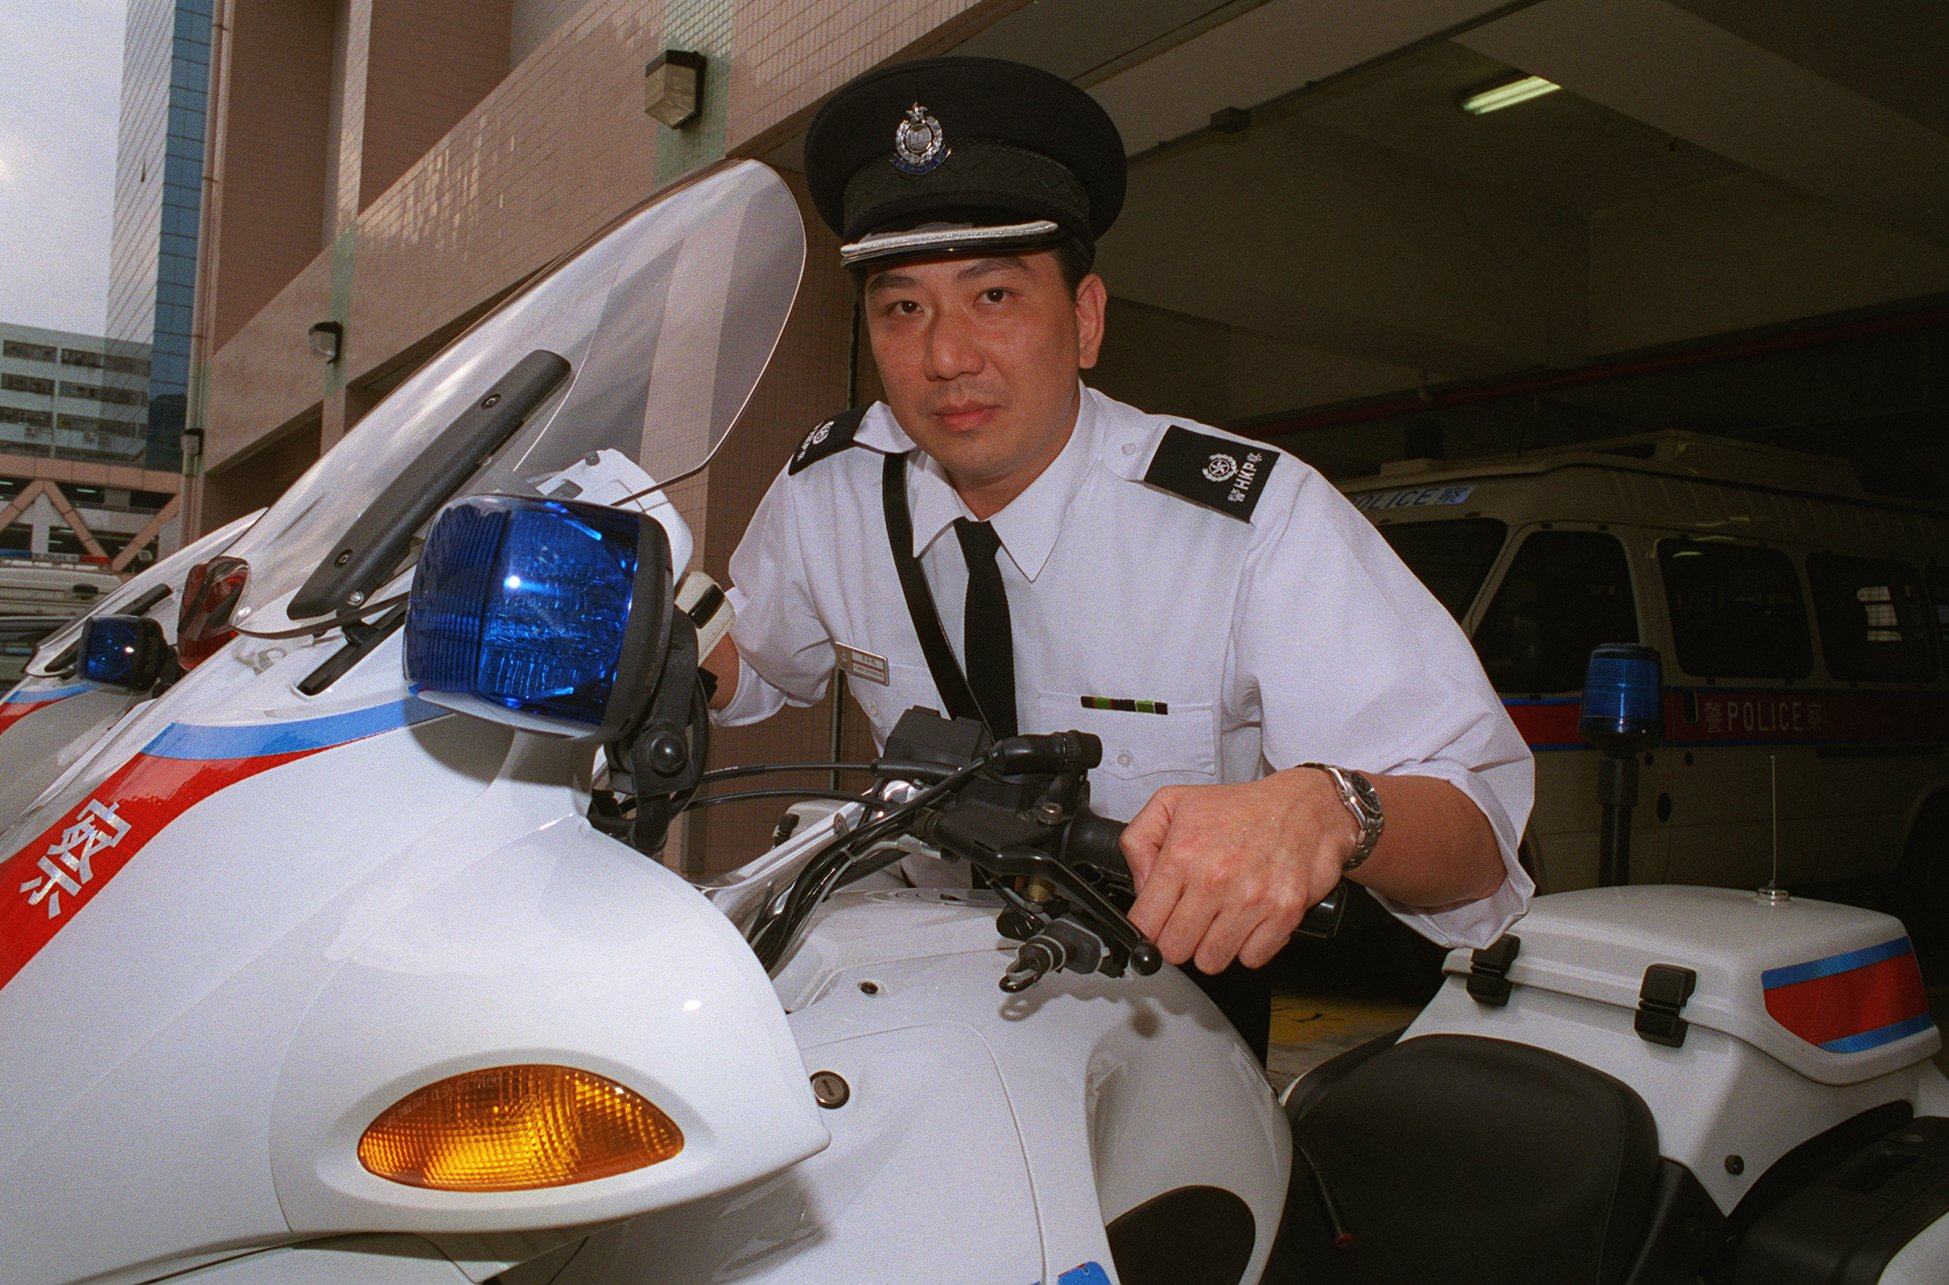 Bill Yuen is understood to be a retired Hong Kong police officer. Photo: Steve Cray